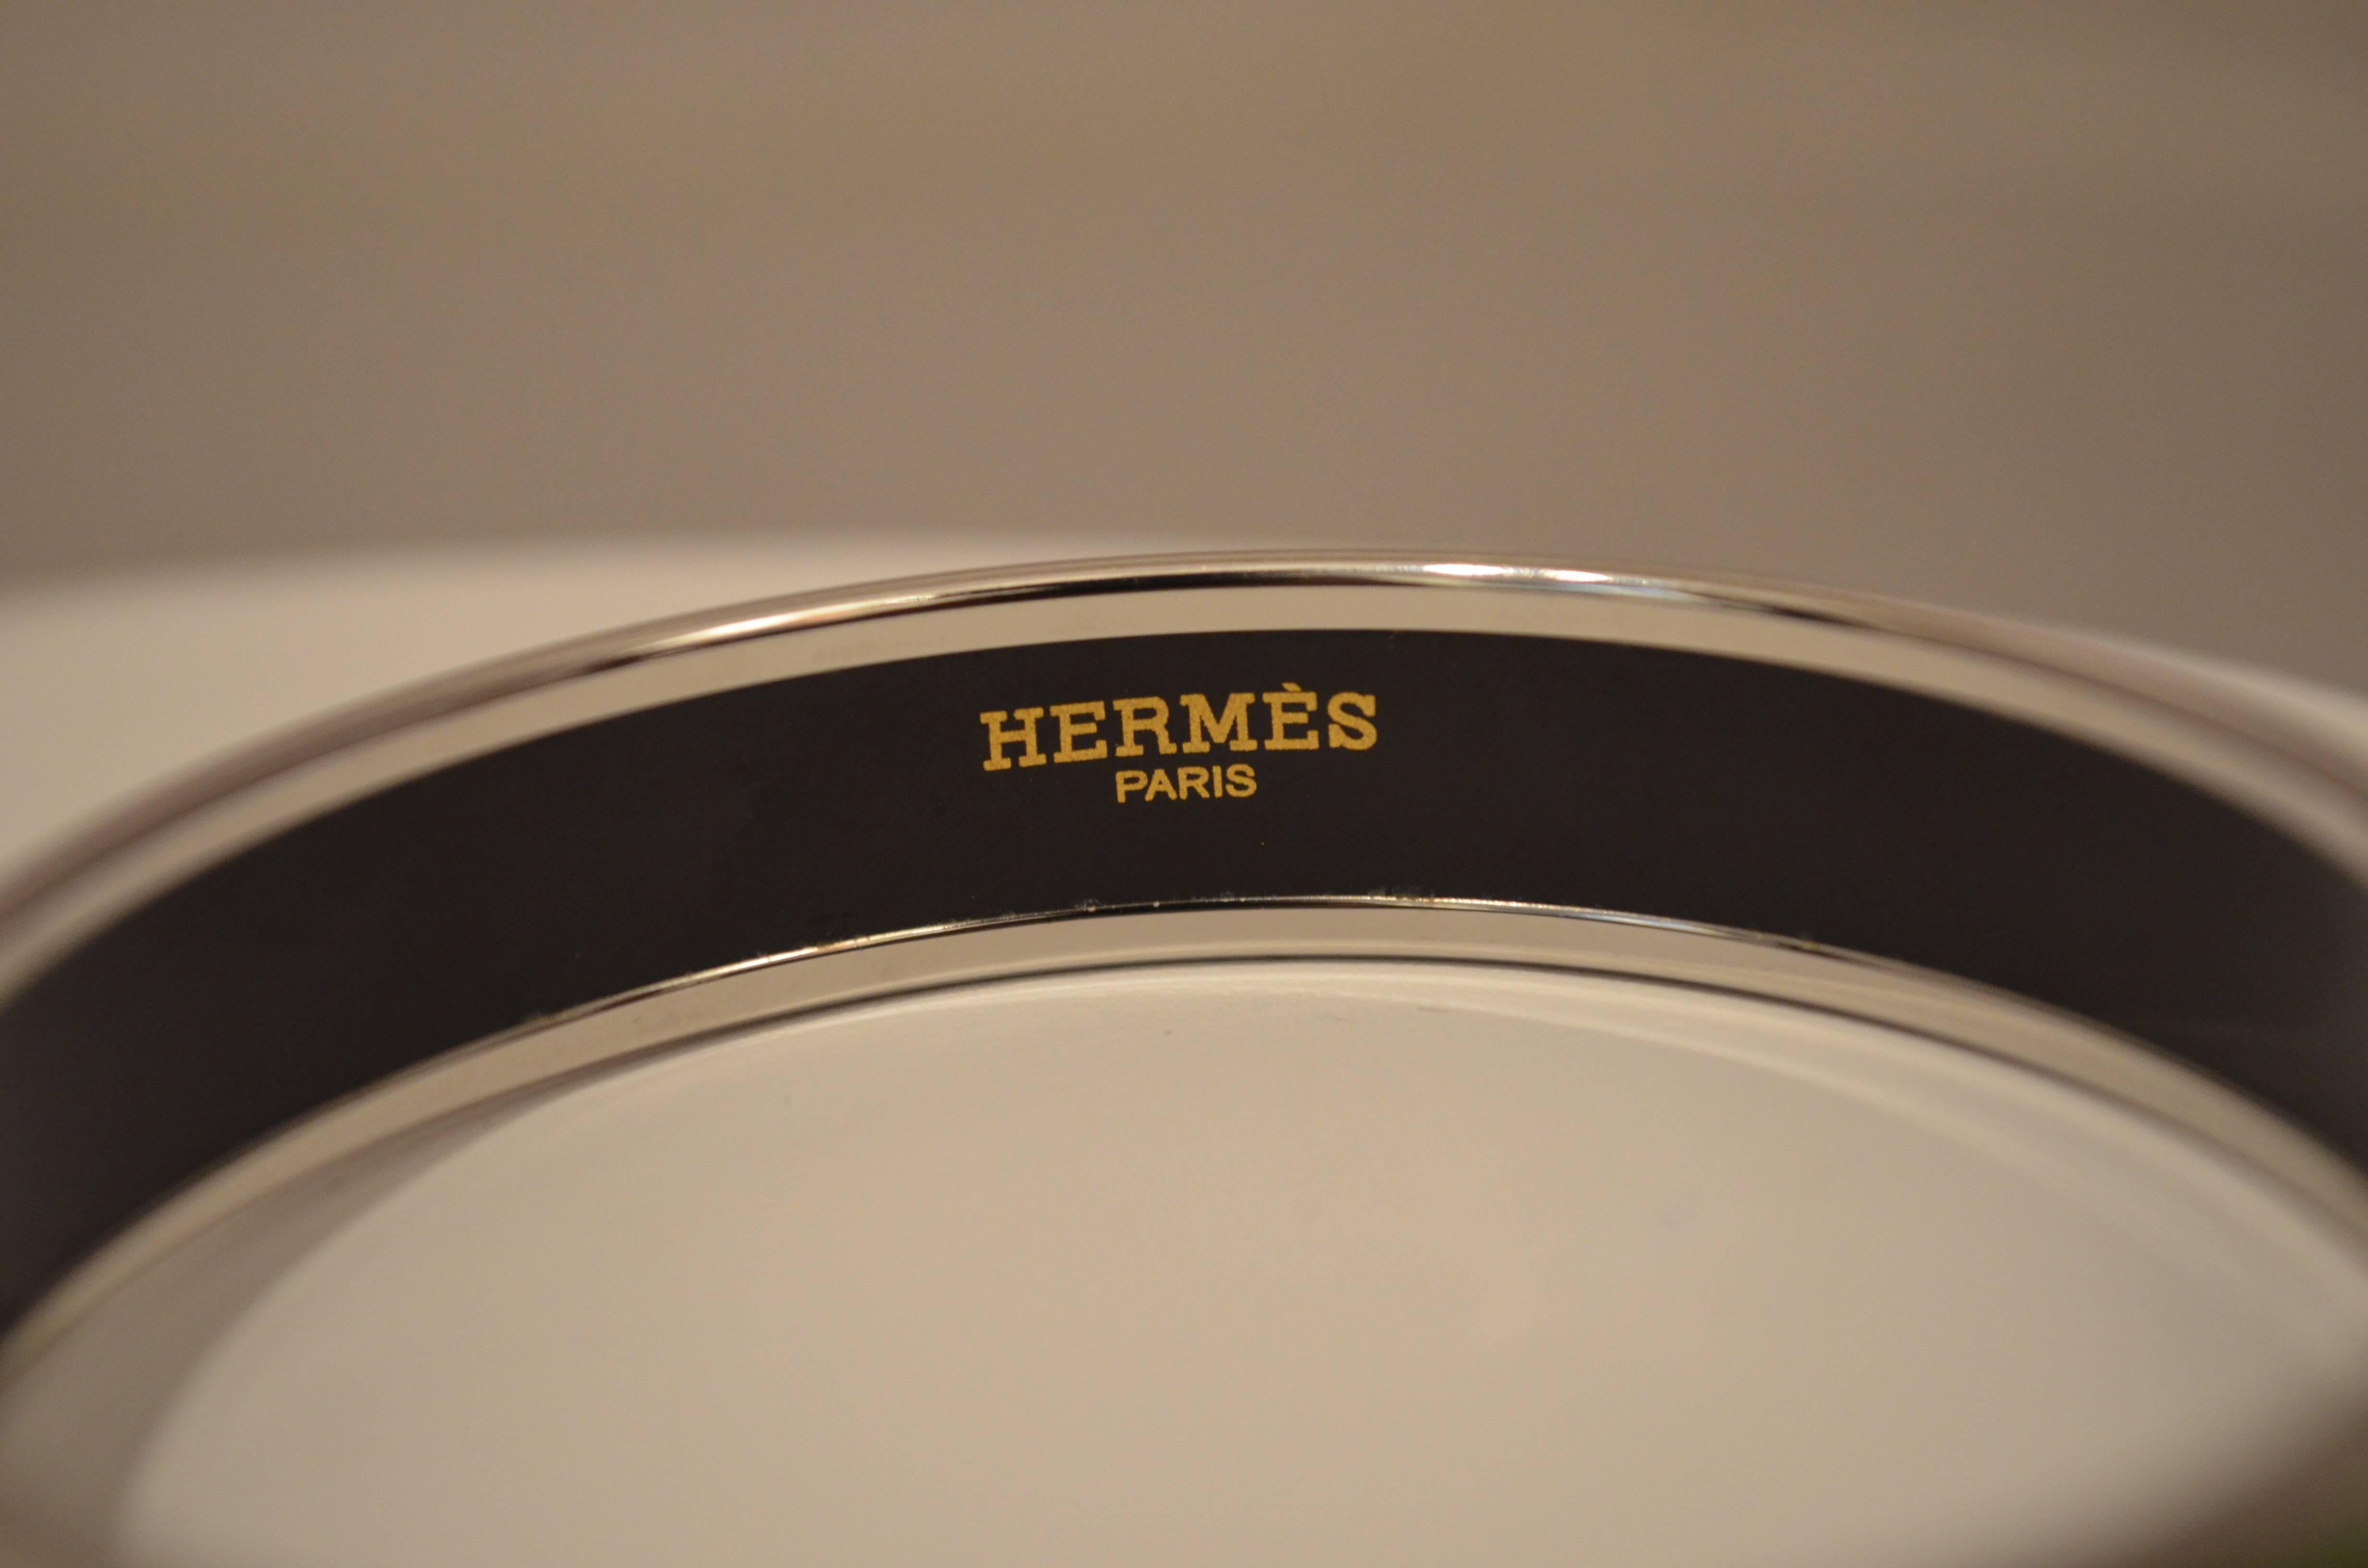 Hermes Paris Lime Green Enamel Bangle Bracelet Small In Excellent Condition In Carmel, CA